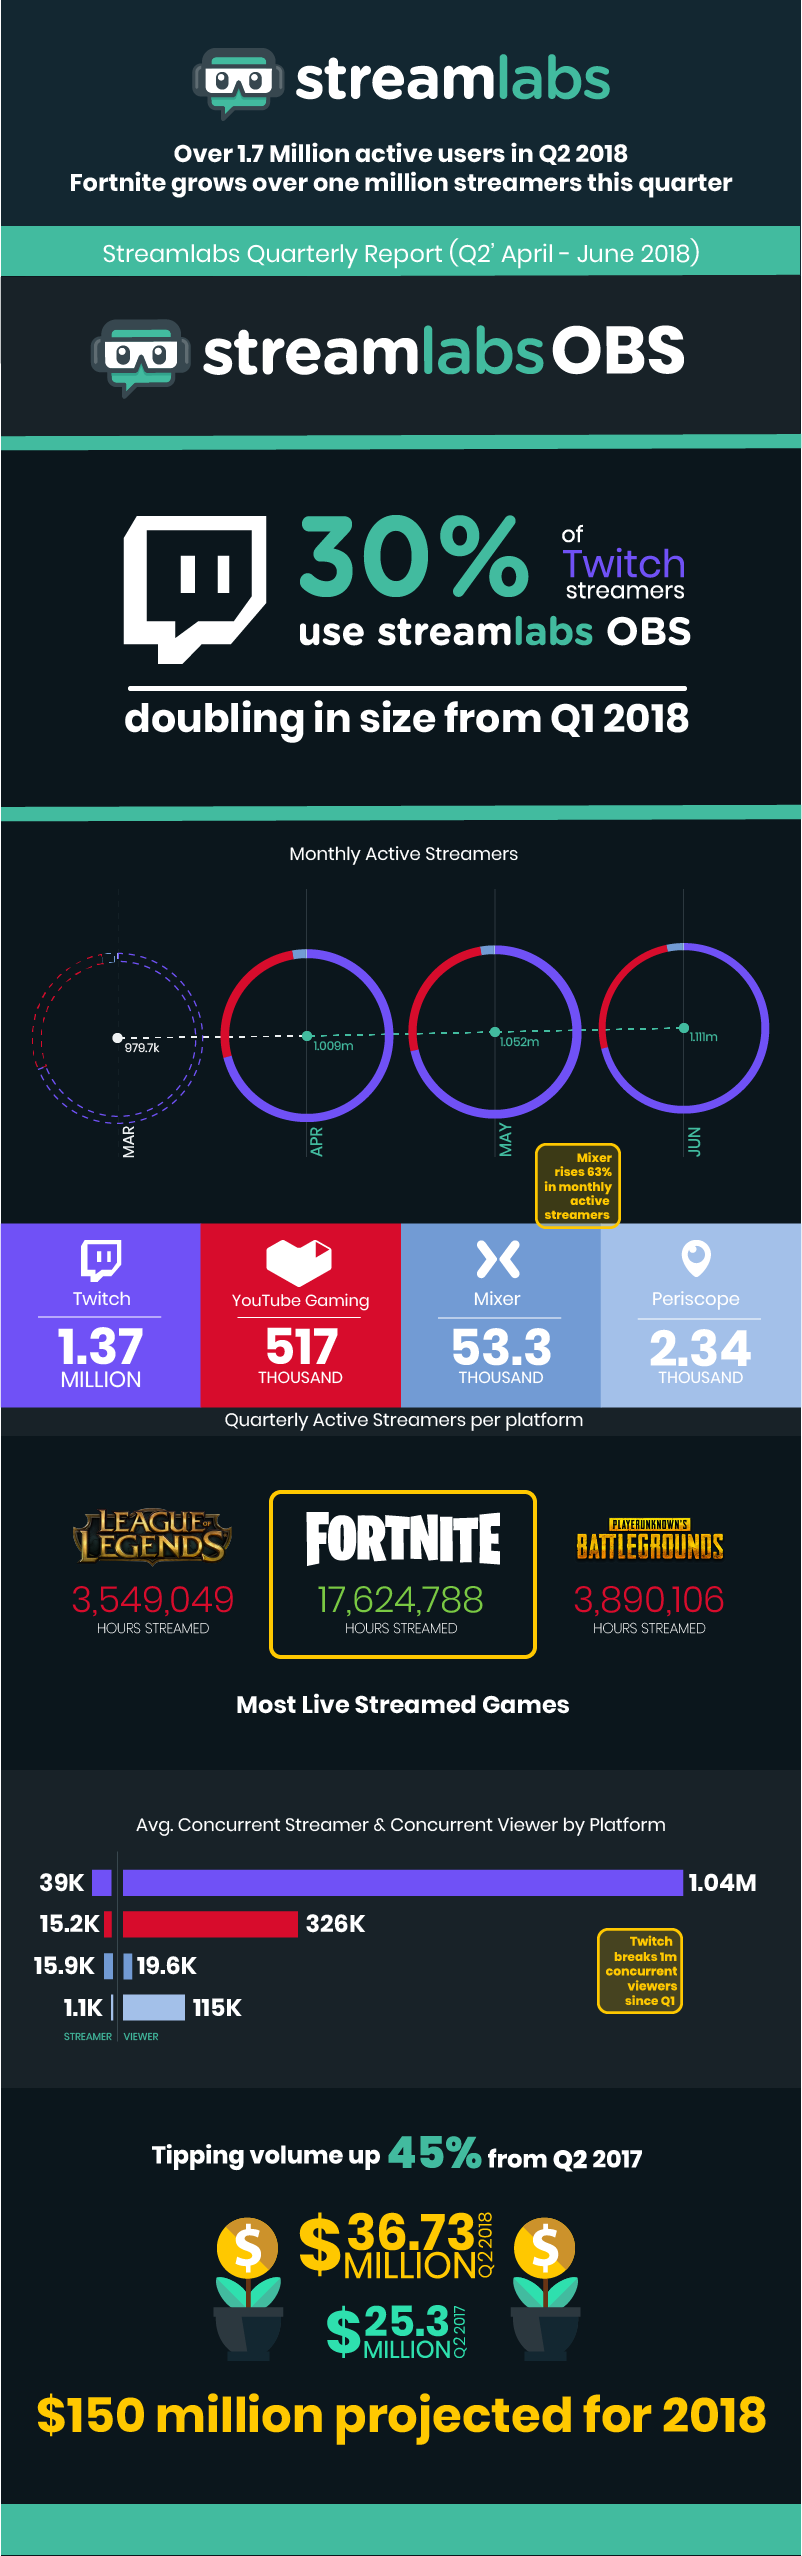 livestreaming q2 18 report streamlabs obs doubles tipping breaks record 36m twitch hits 1m avg ccv fortnite dominates - how to record fortnite gameplay with obs